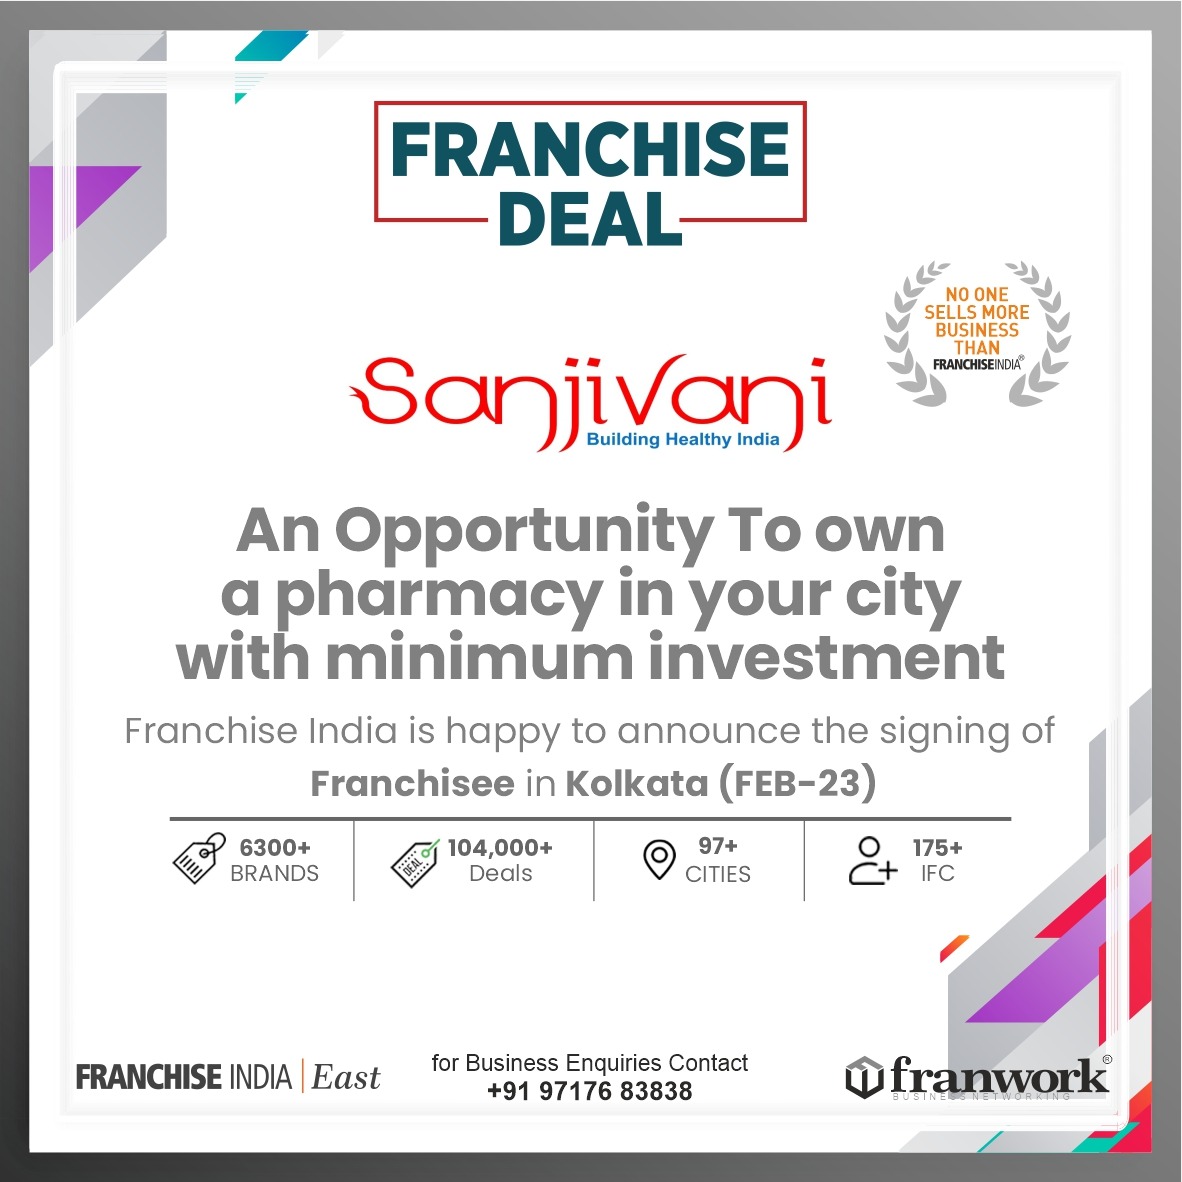 Heartiest Congratulations to #Sanjivani for New #Franchisee in #Kolkata.

#StartYourOwnBusiness #franchise #entrepreneurs #startup #franchiseindia #franchiseopportunity #lowcostinvestment #investment #Business #businessopportunity #bestbusiness #bestbusinessopportunity